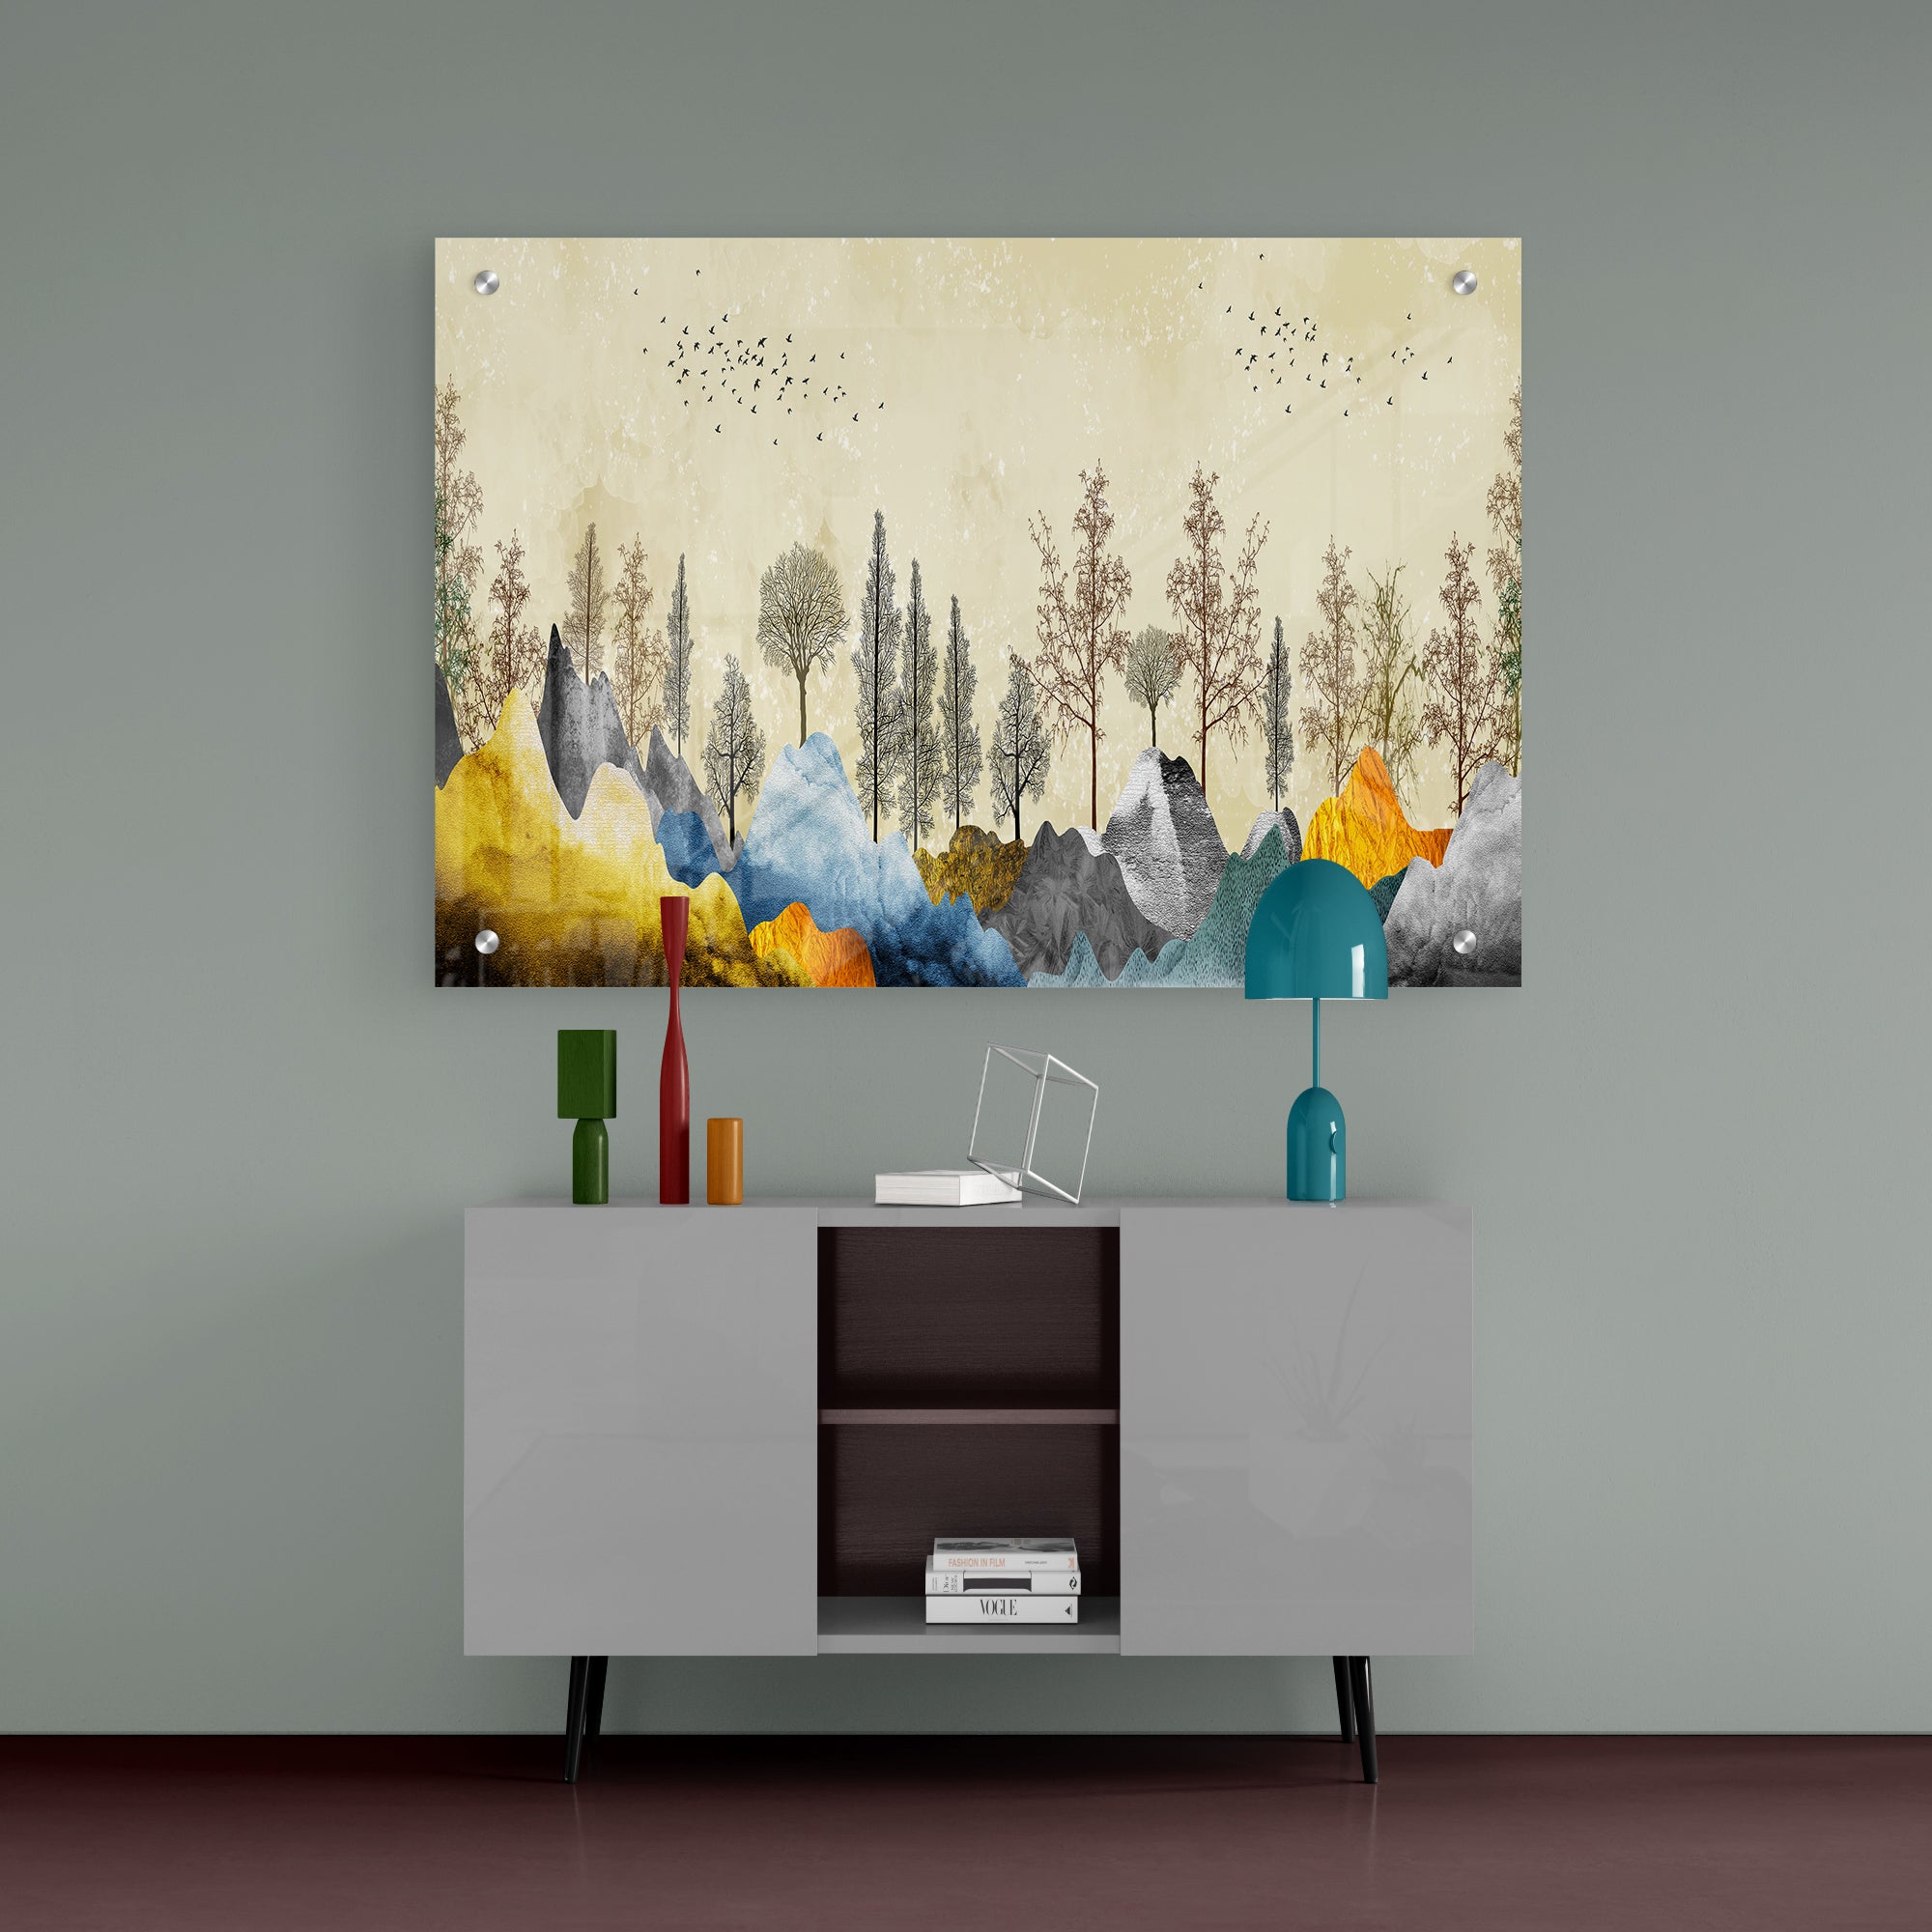 Beautiful Mountain Landscape with Trees Premium Acrylic Wall painting